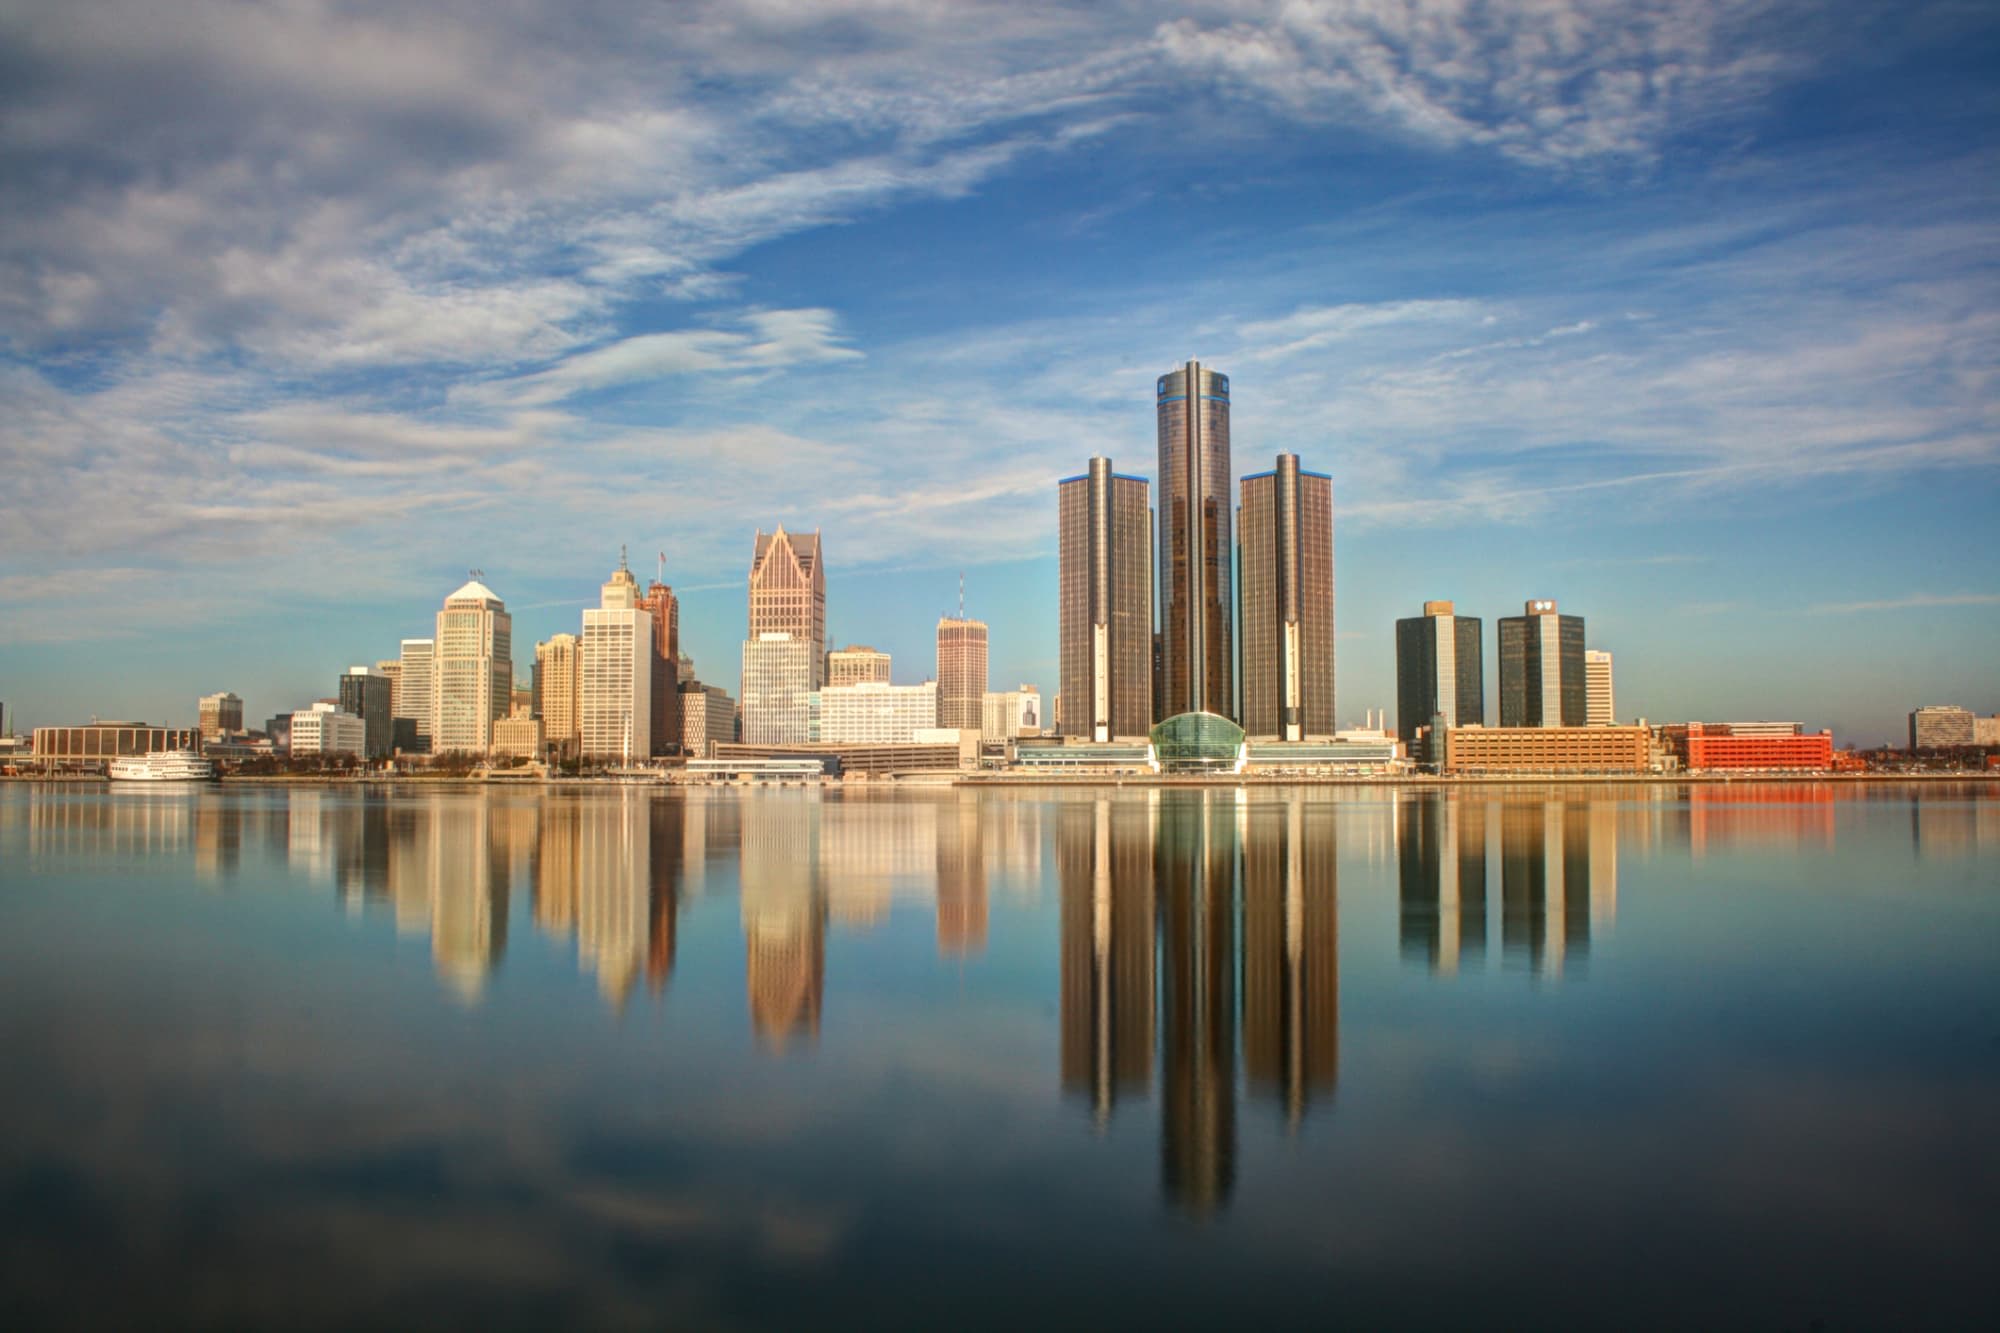 Detroit, Michigan skyline and reflection in river